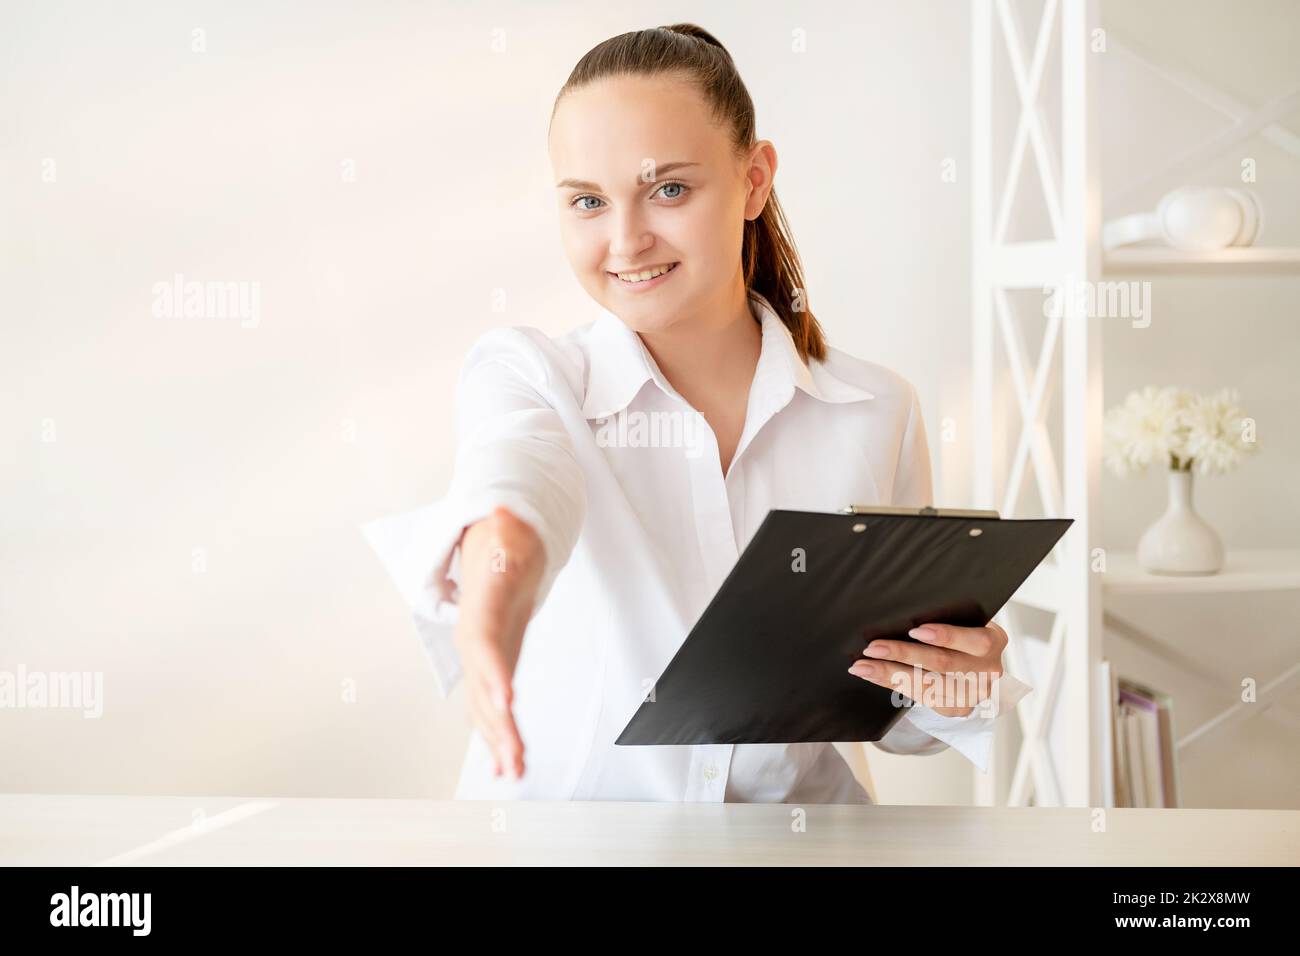 Business contract. Partnership agreement. Professional cooperation. Confident cheerful woman with clipboard greeting client with handshake at light mo Stock Photo